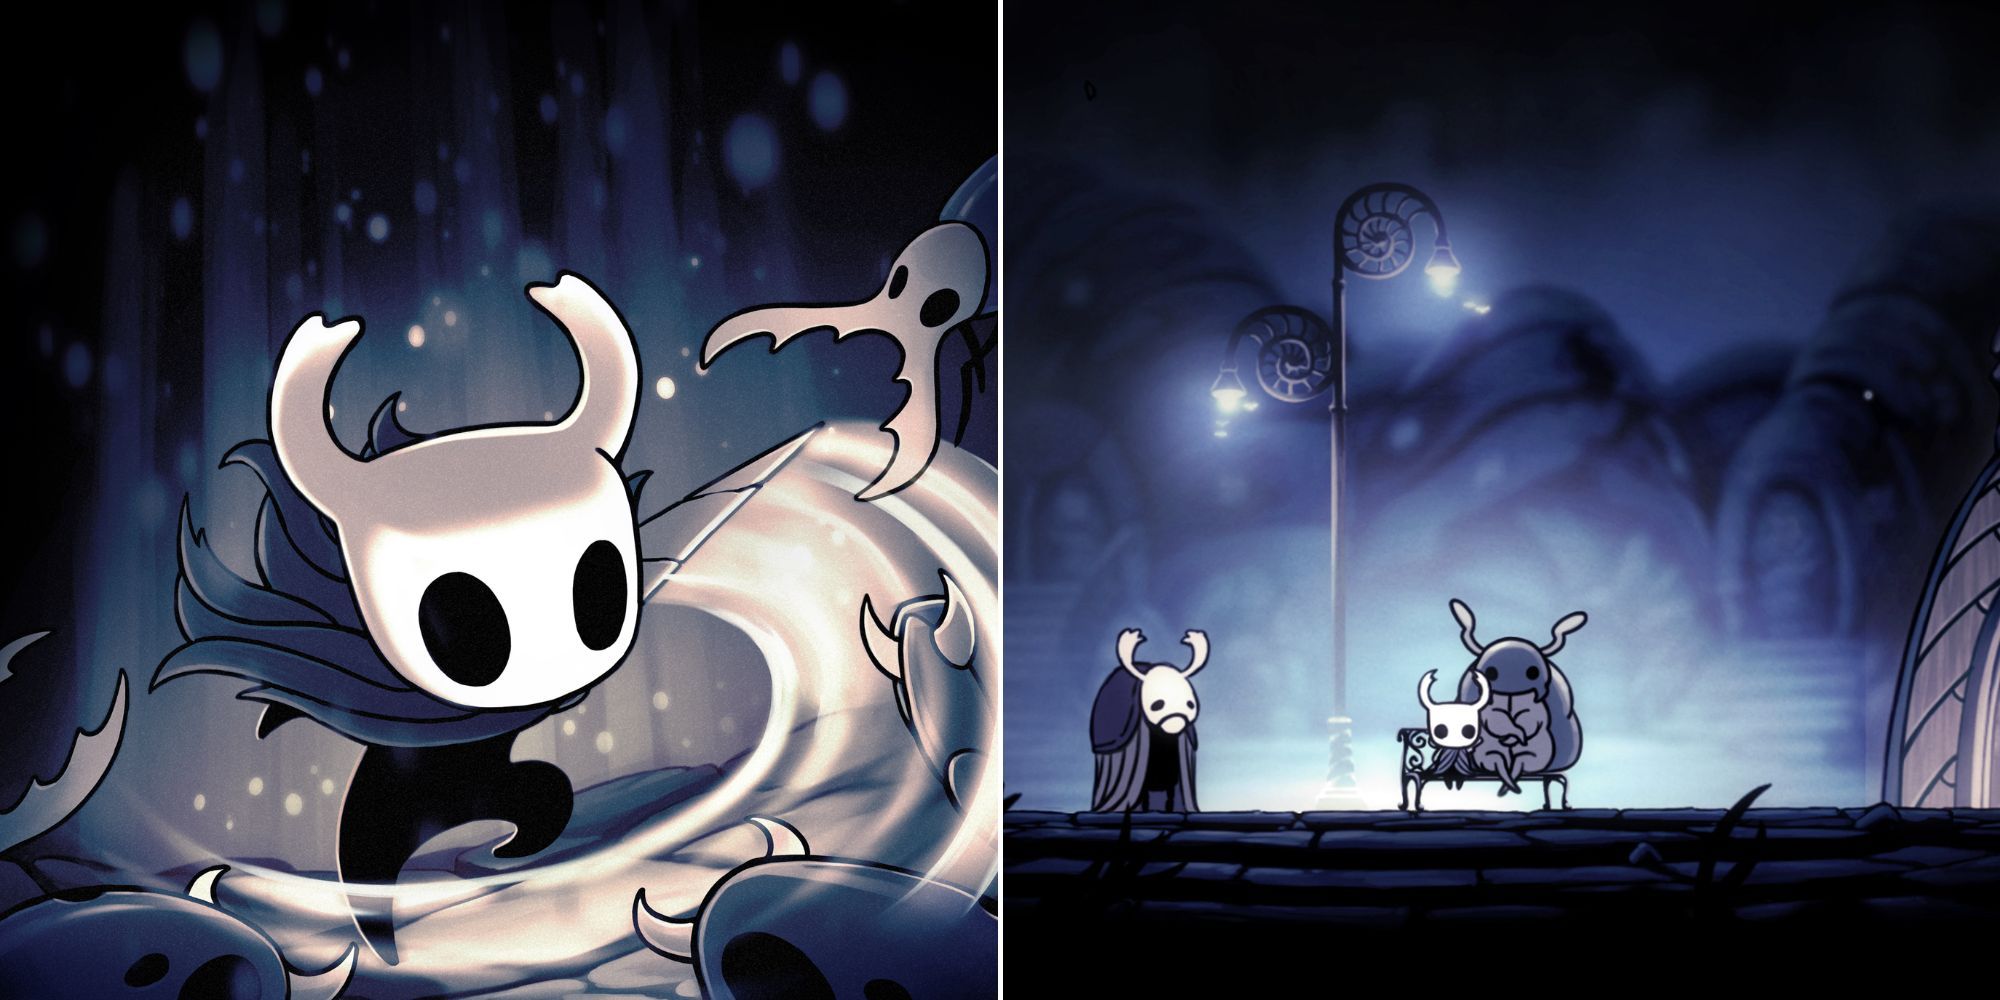 Hollow Knight - Art work - Sitting On A Bench